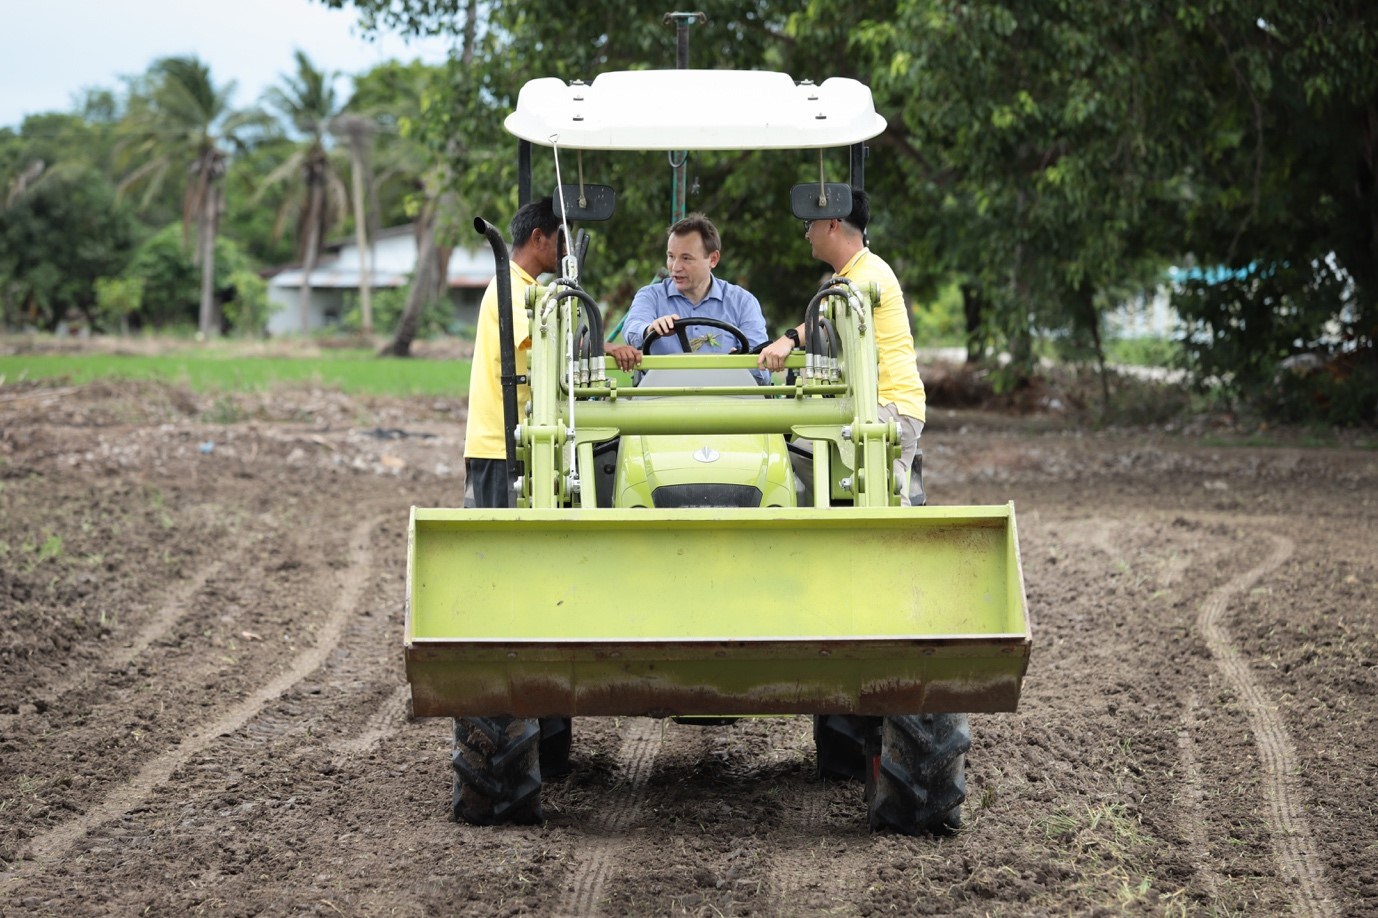 German Ambassador to Thailand Georg Schmidt drives a tractor in the rice field in Suphan Buri, Central Thailand. (Photo credit: GIZ Thailand)